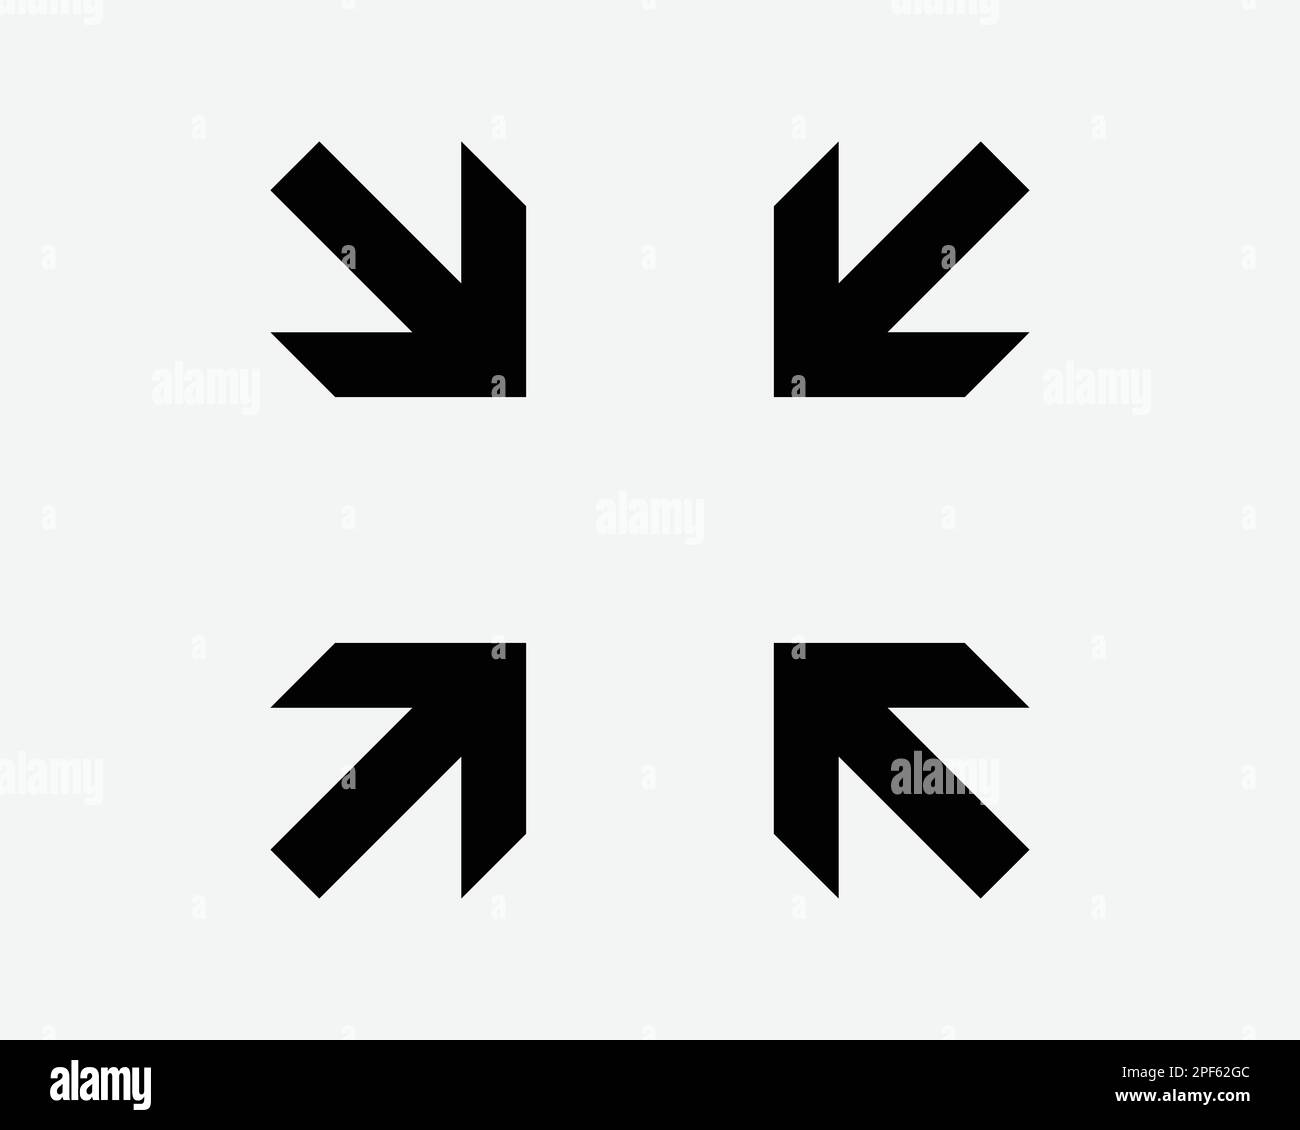 Arrows Pointing Point Inwards Zoom In Center Four Corners Black White Silhouette Sign Symbol Icon Vector Graphic Clipart Illustration Artwork Pictogra Stock Vector